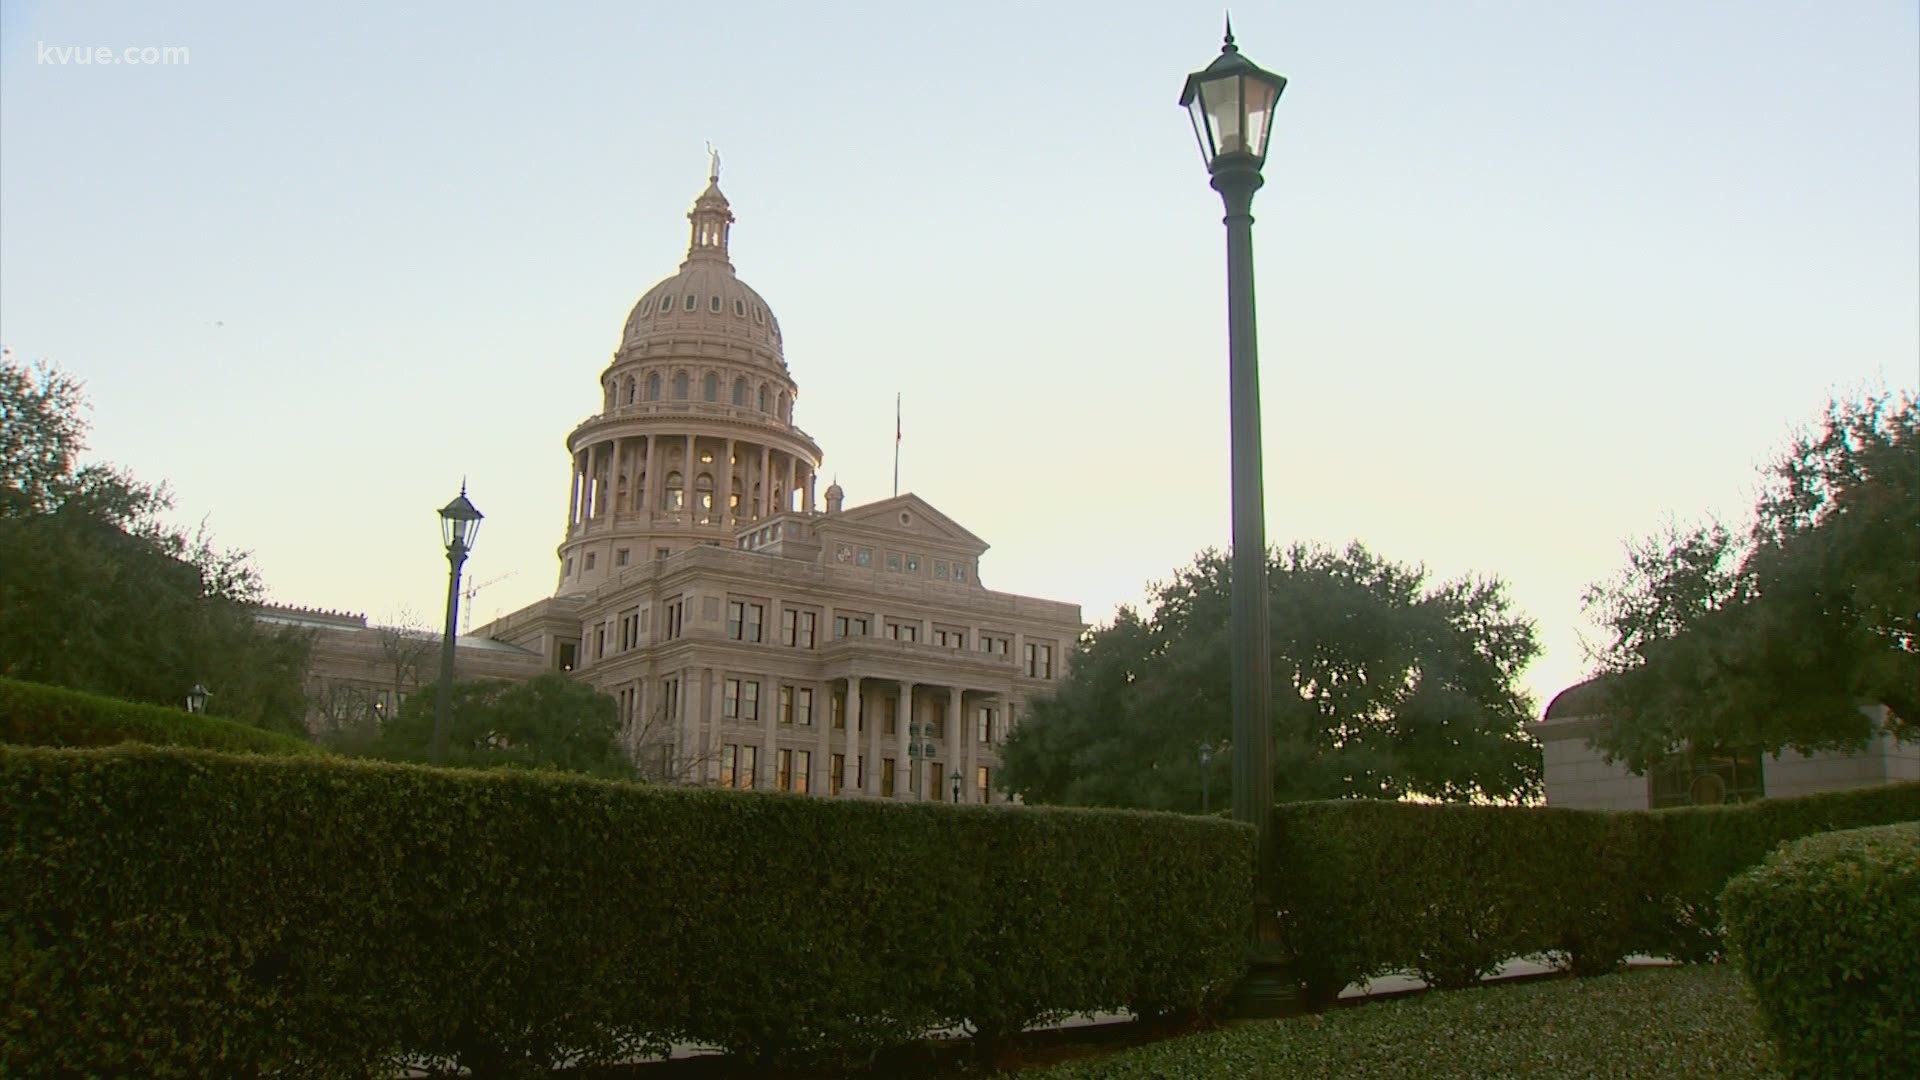 The Texas House gave final approval to one of its priority bills. House Bill 3 would limit the governor's power during a pandemic.